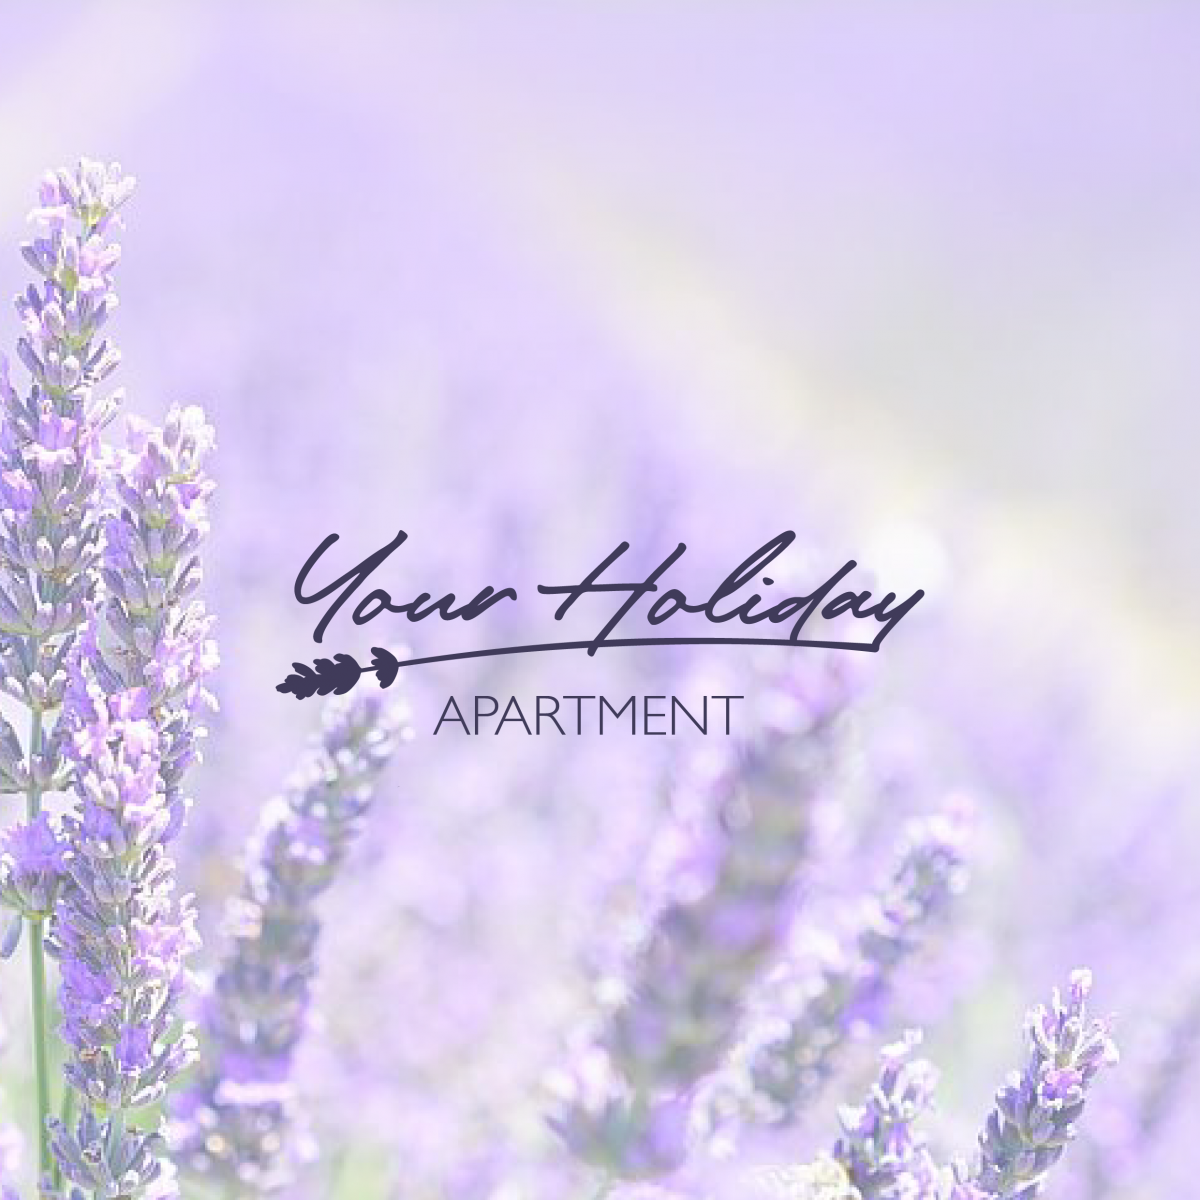 Logo: Your Holiday apartment